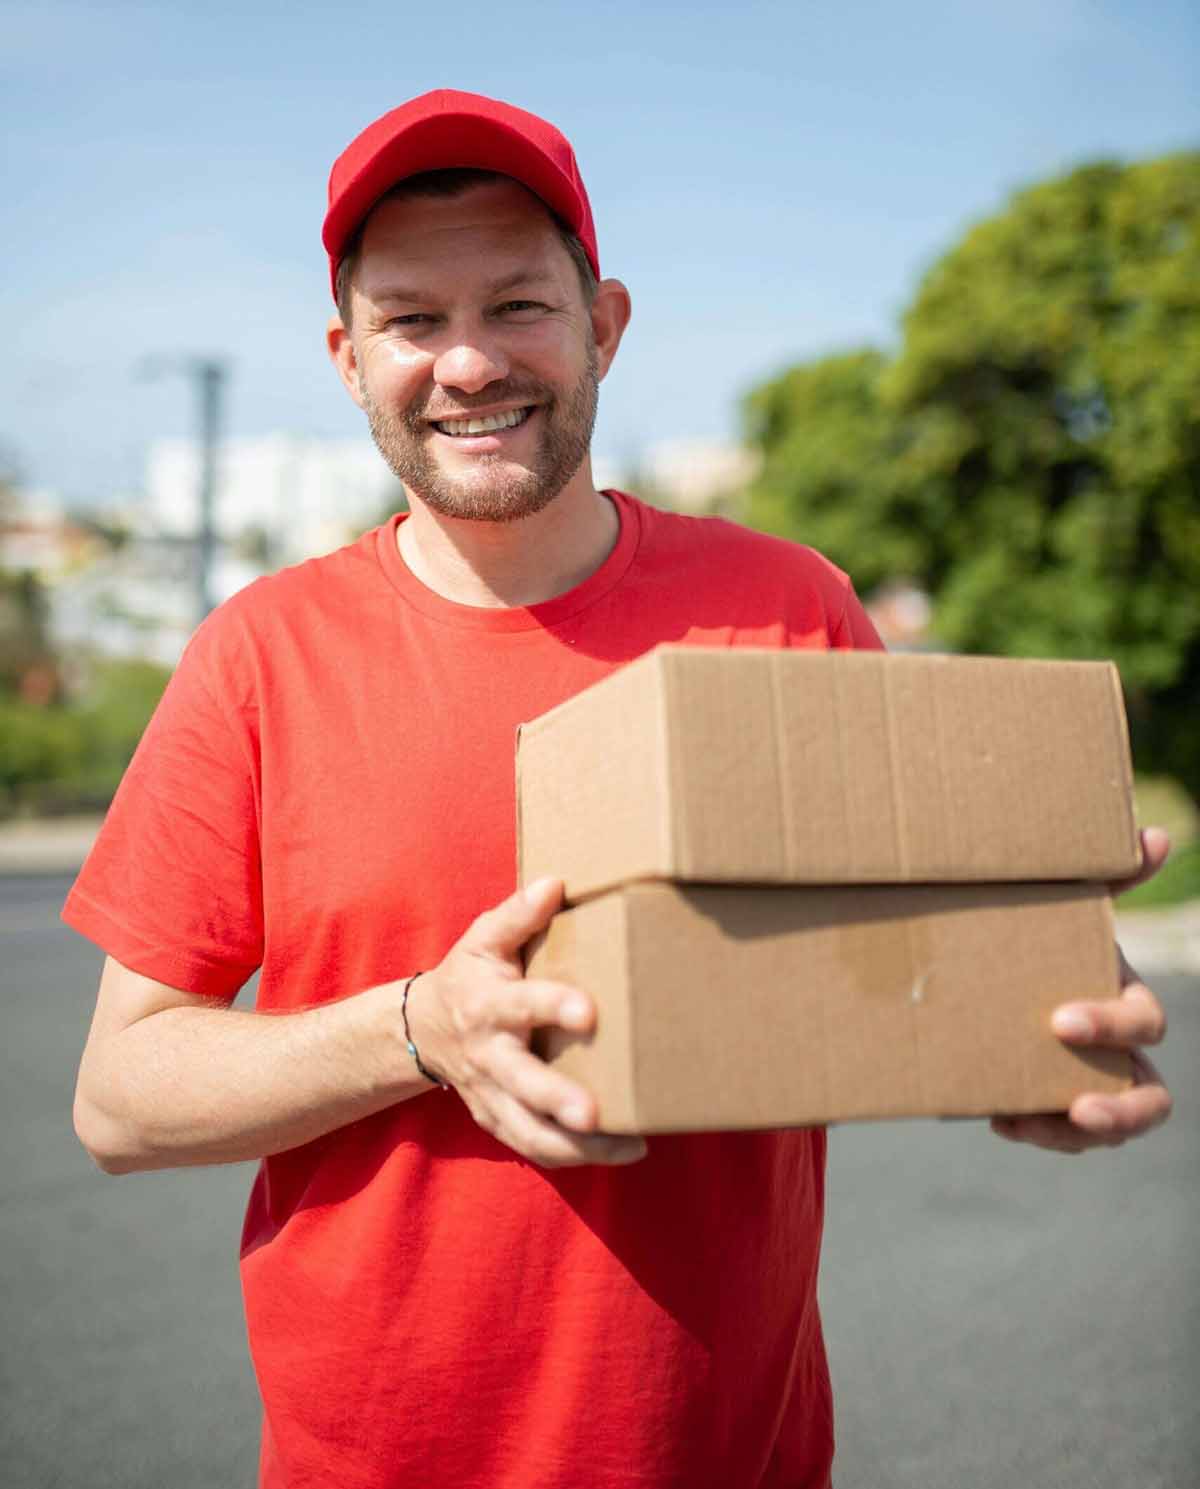 Man in red shirt holding boxes